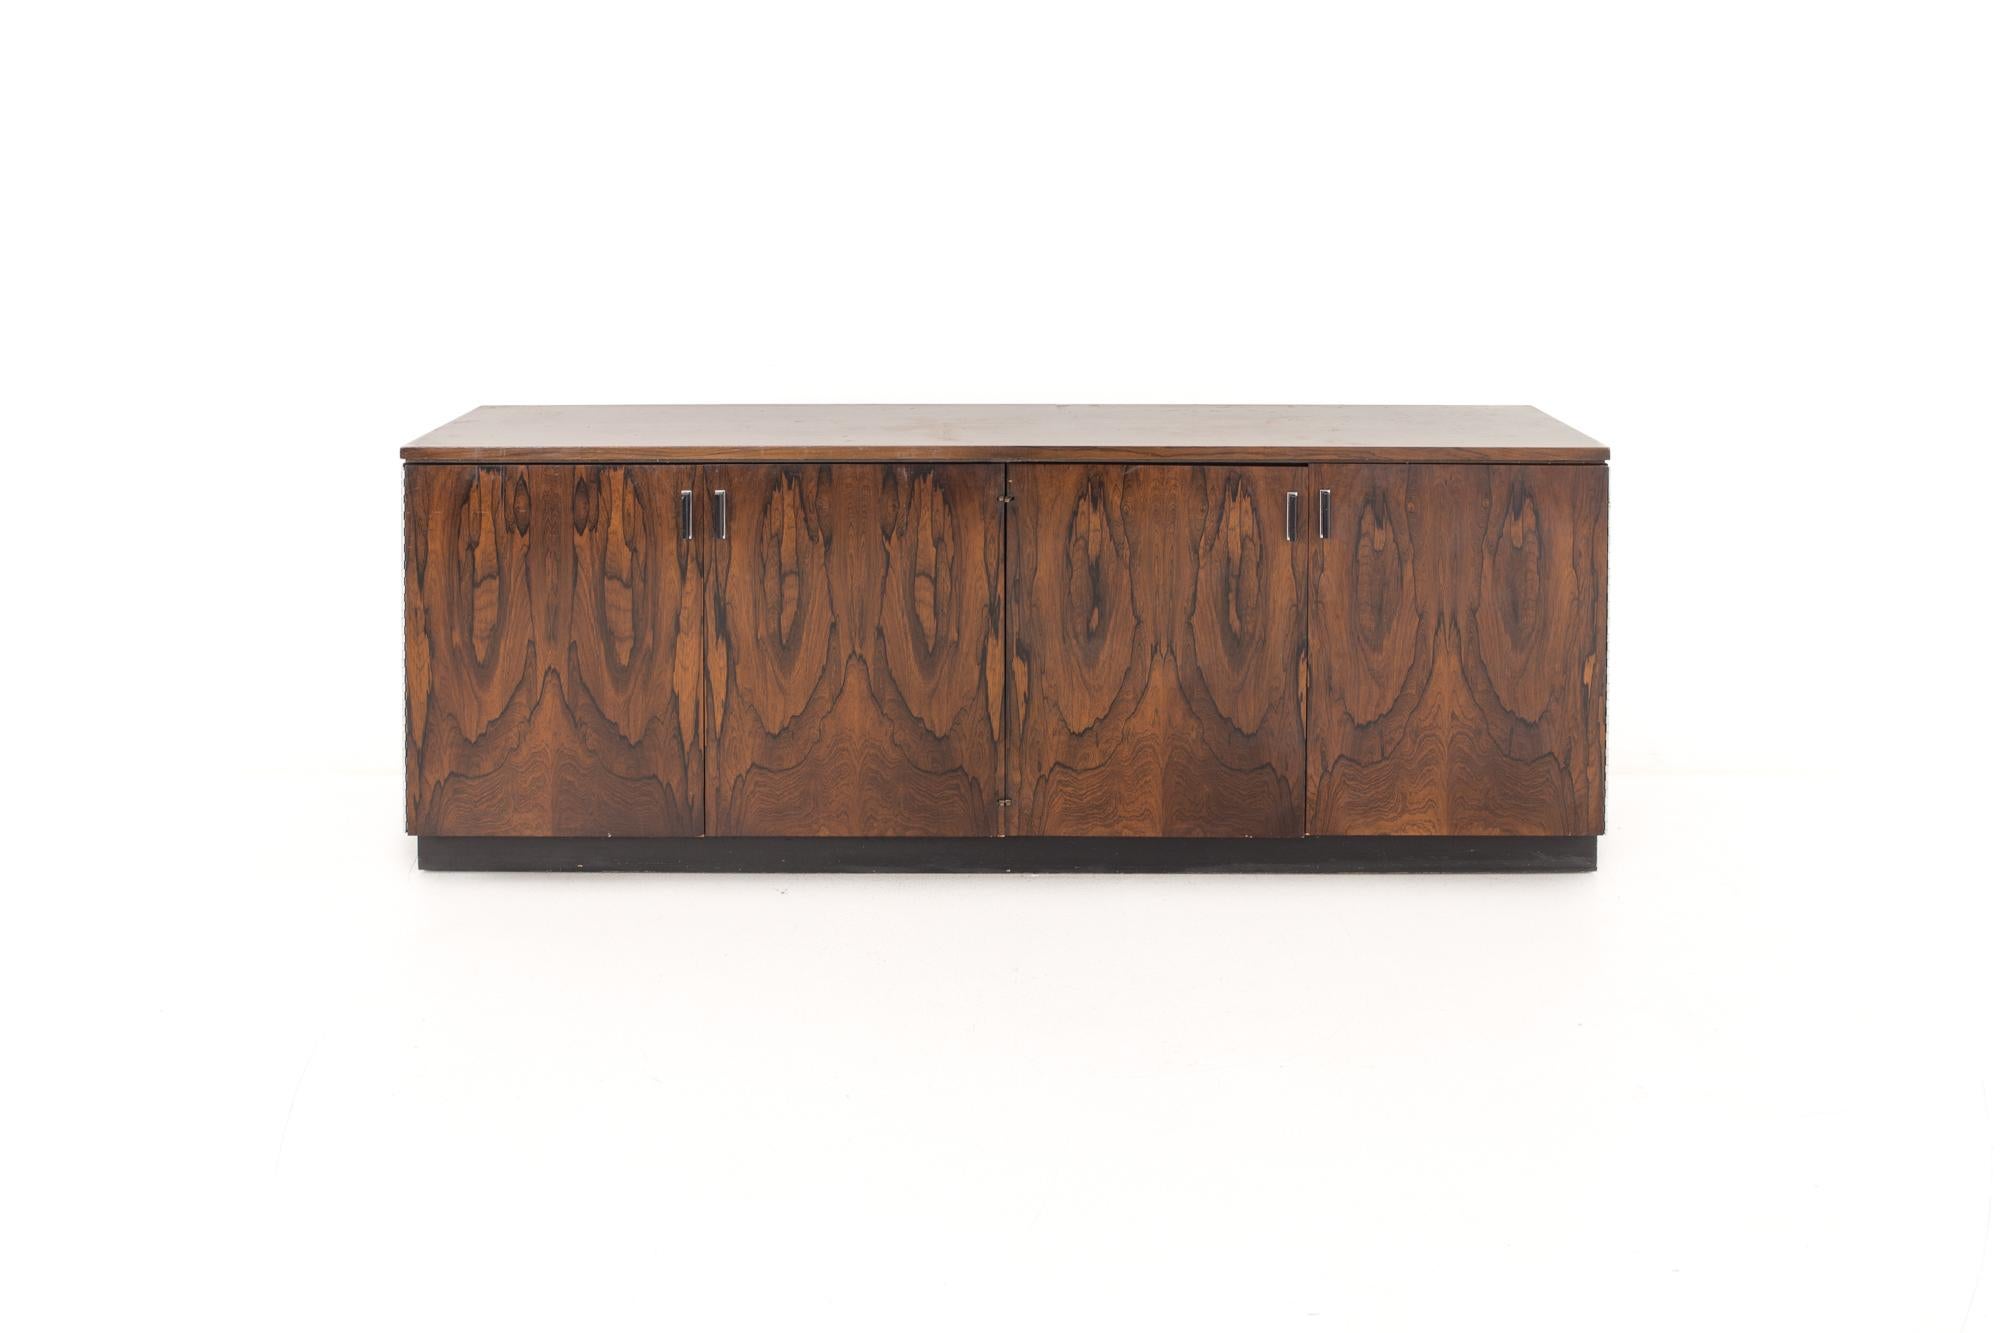 Jack Cartwright for Founders mid century rosewood credenza

This piece measures: 71 wide x 18 deep x 27 inches high

All pieces of furniture can be had in what we call restored vintage condition. That means the piece is restored upon purchase so